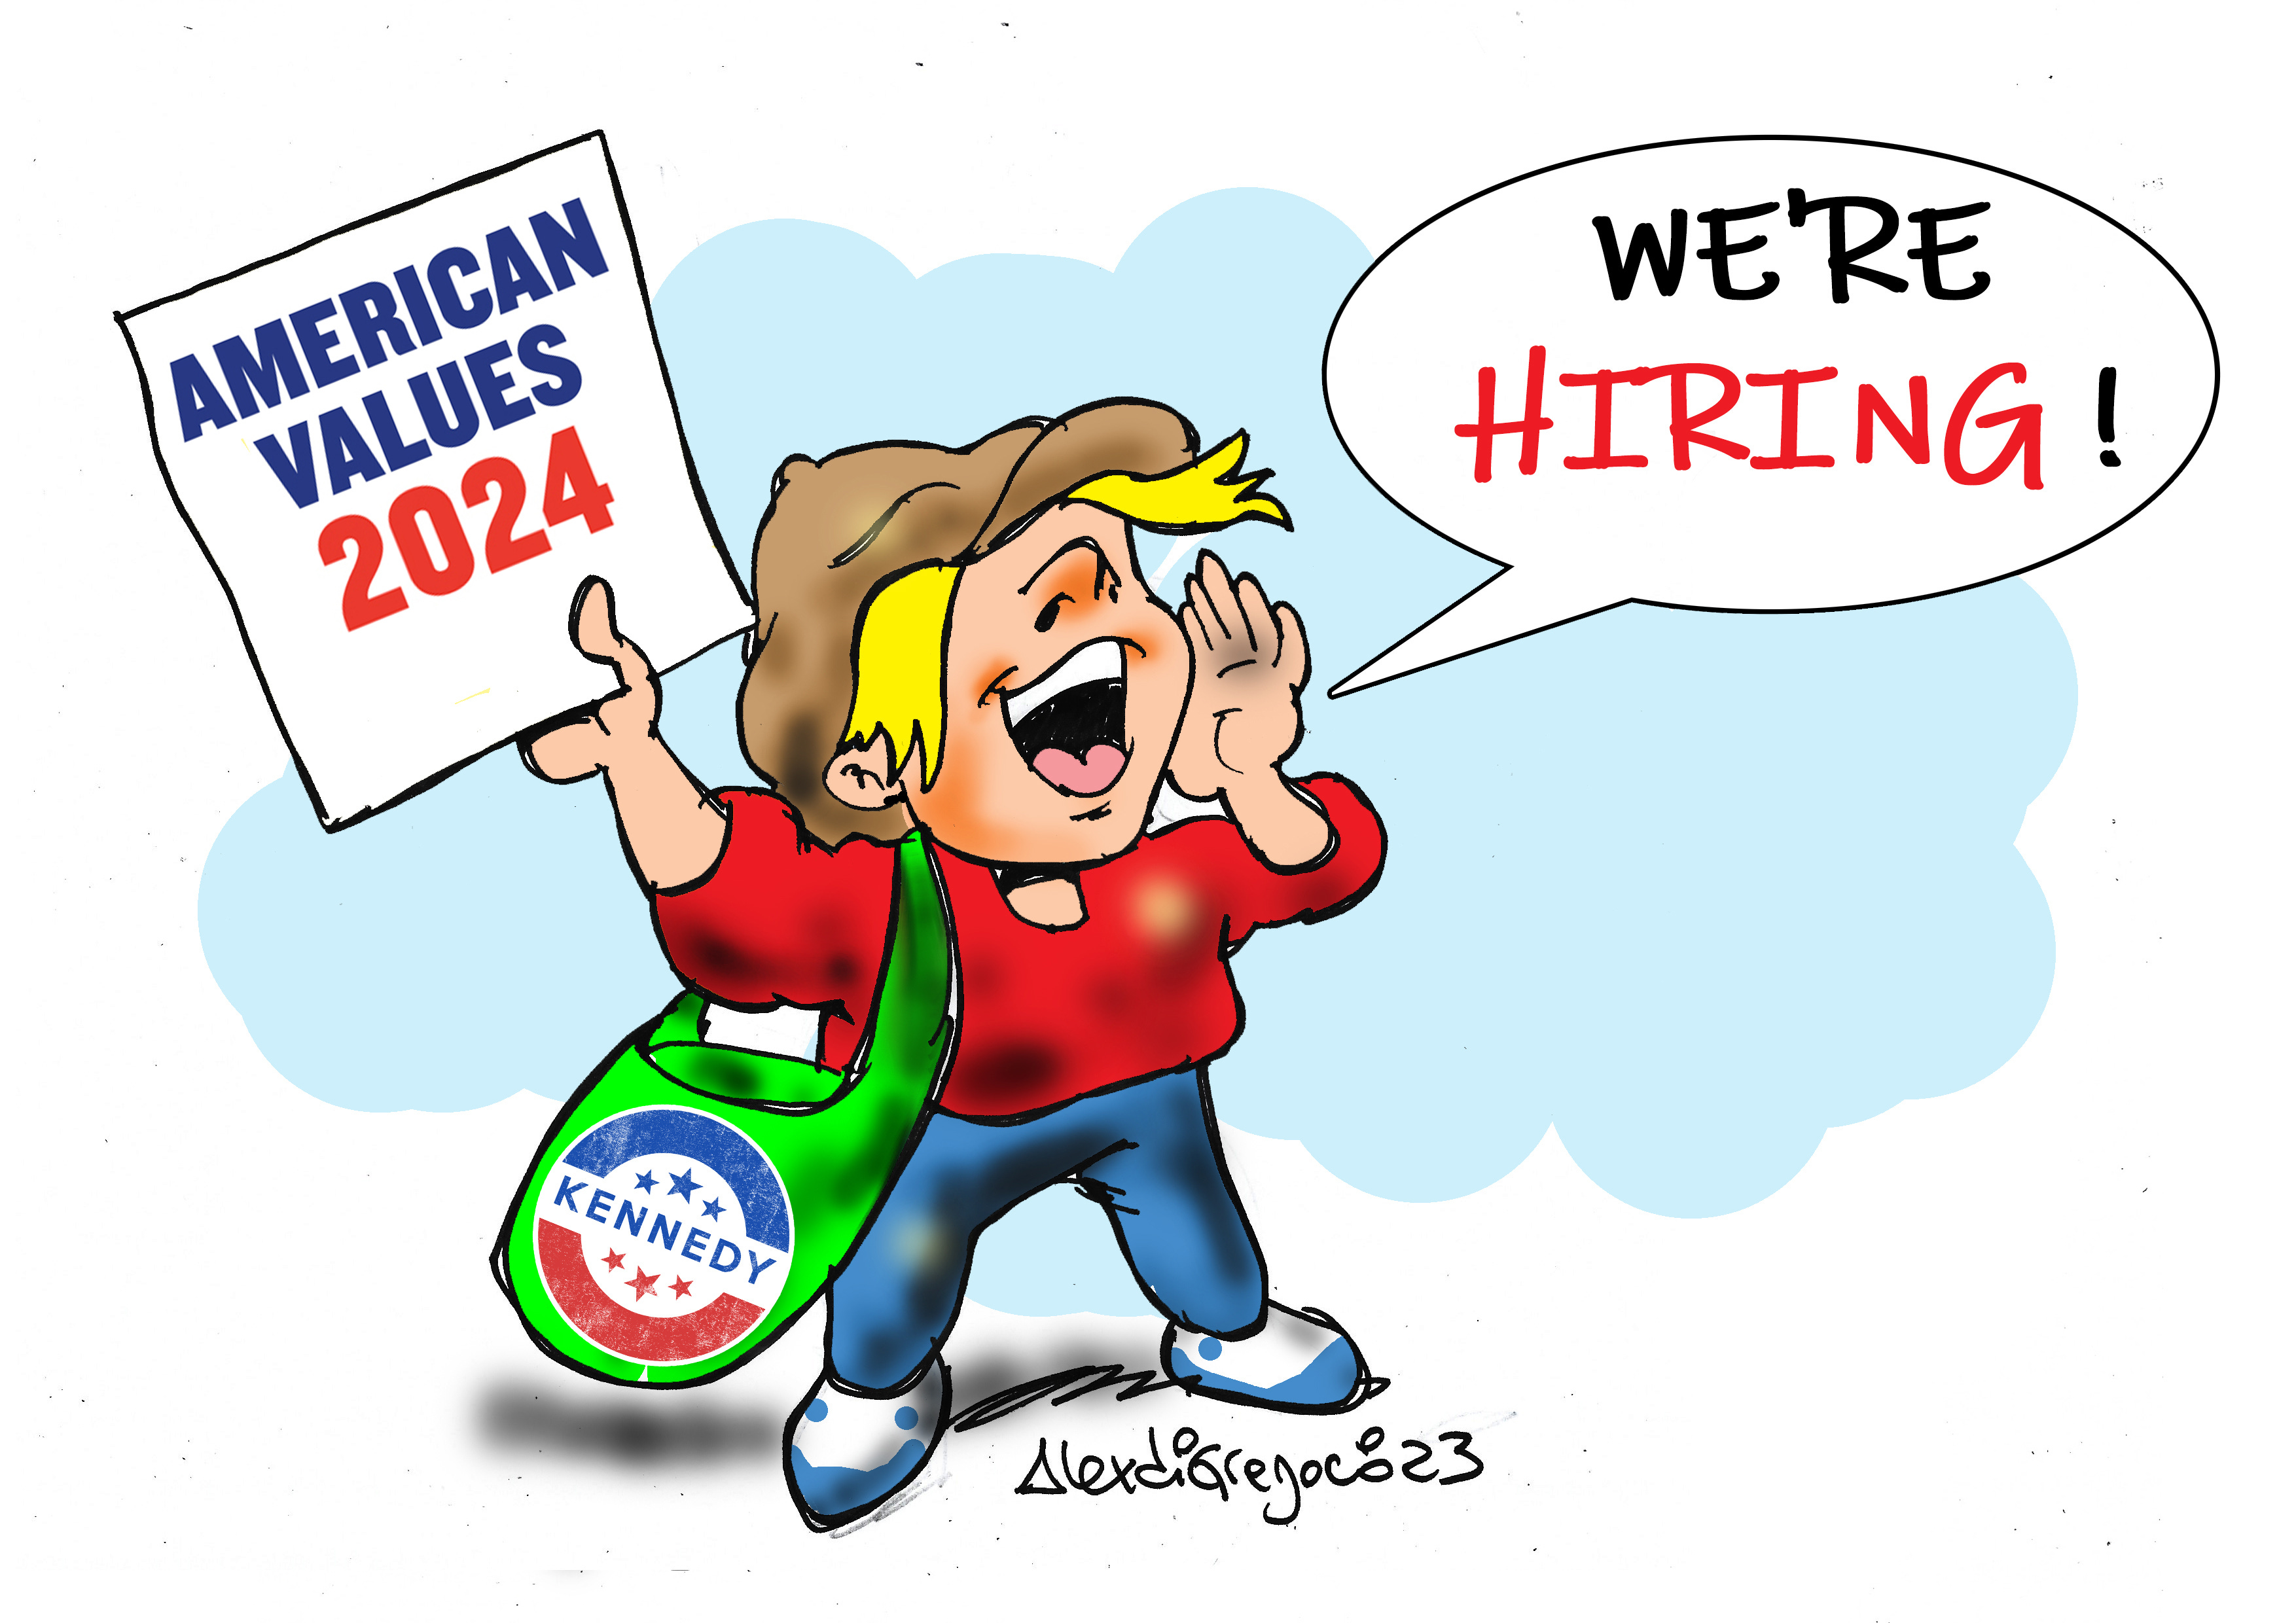 American Values 2024 is Hiring! The Kennedy Beacon